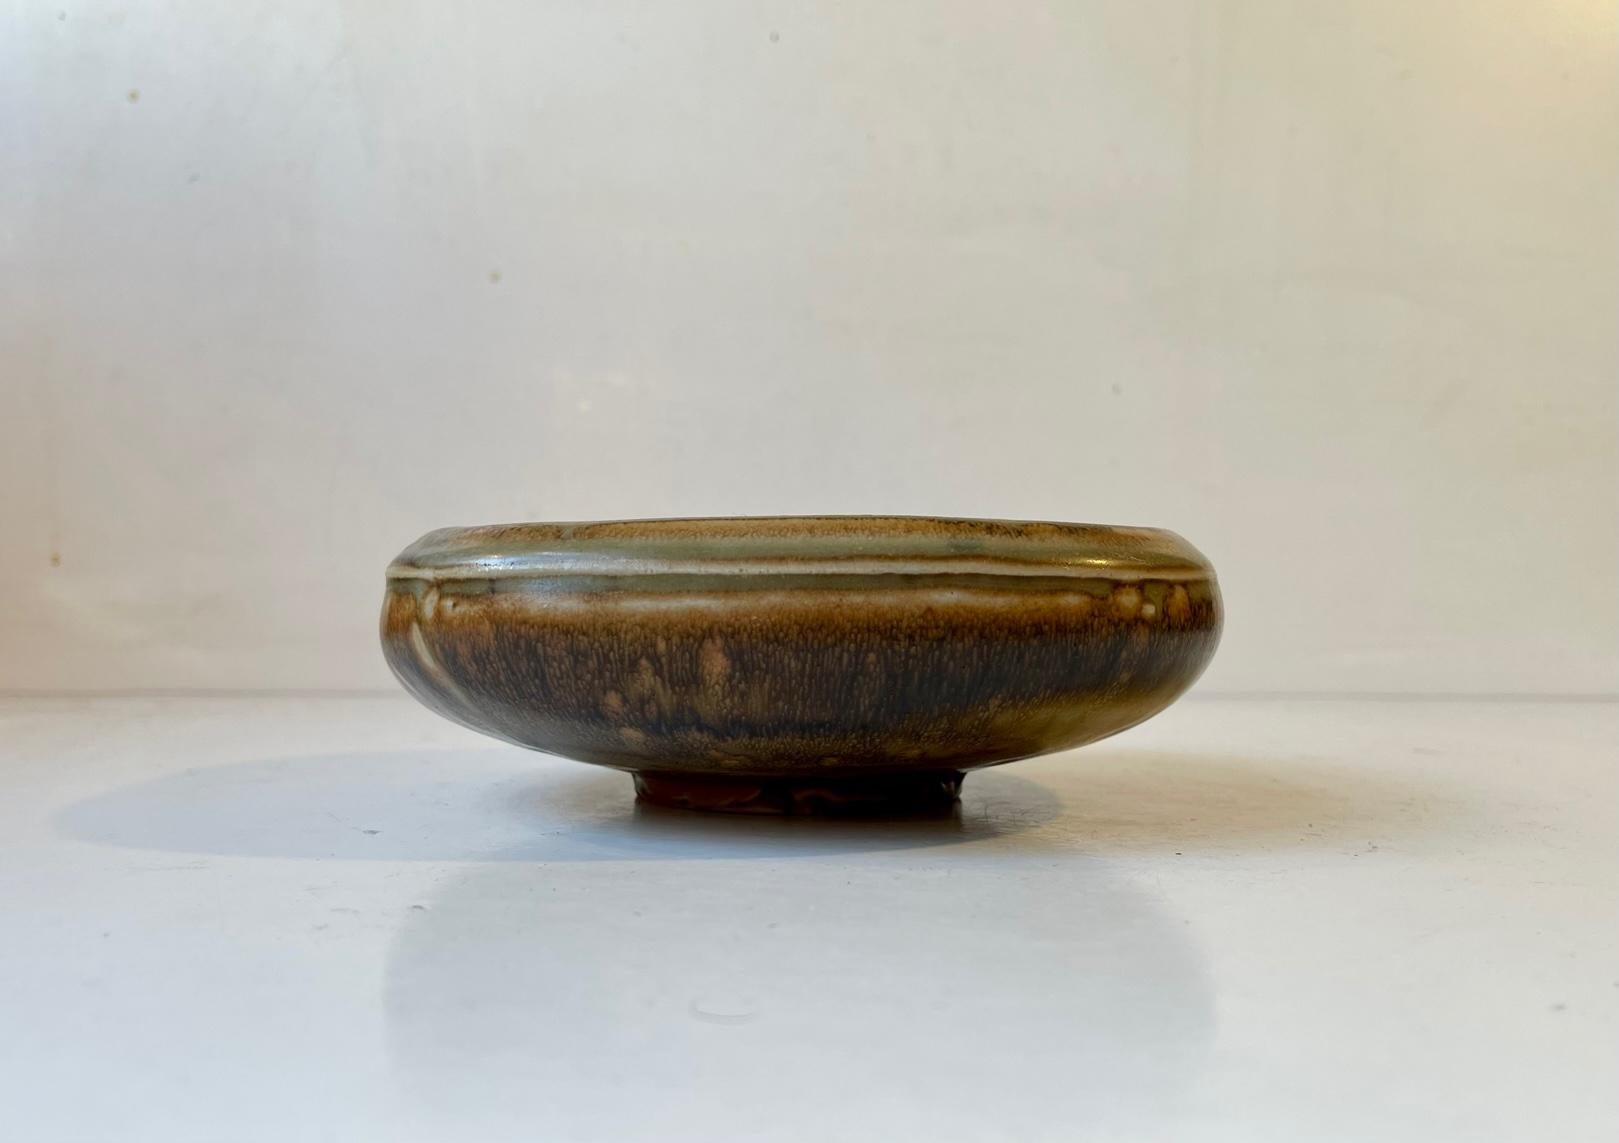 Organically shaped stoneware bowl in earthy Sung and Crystaline Glazes. It was designed by danish ceramist Bode Willumsen and manufactured by Royal Copenhagen in the late 1940s. Early on in his career Bode Willumsen took Axel Salto under his wings